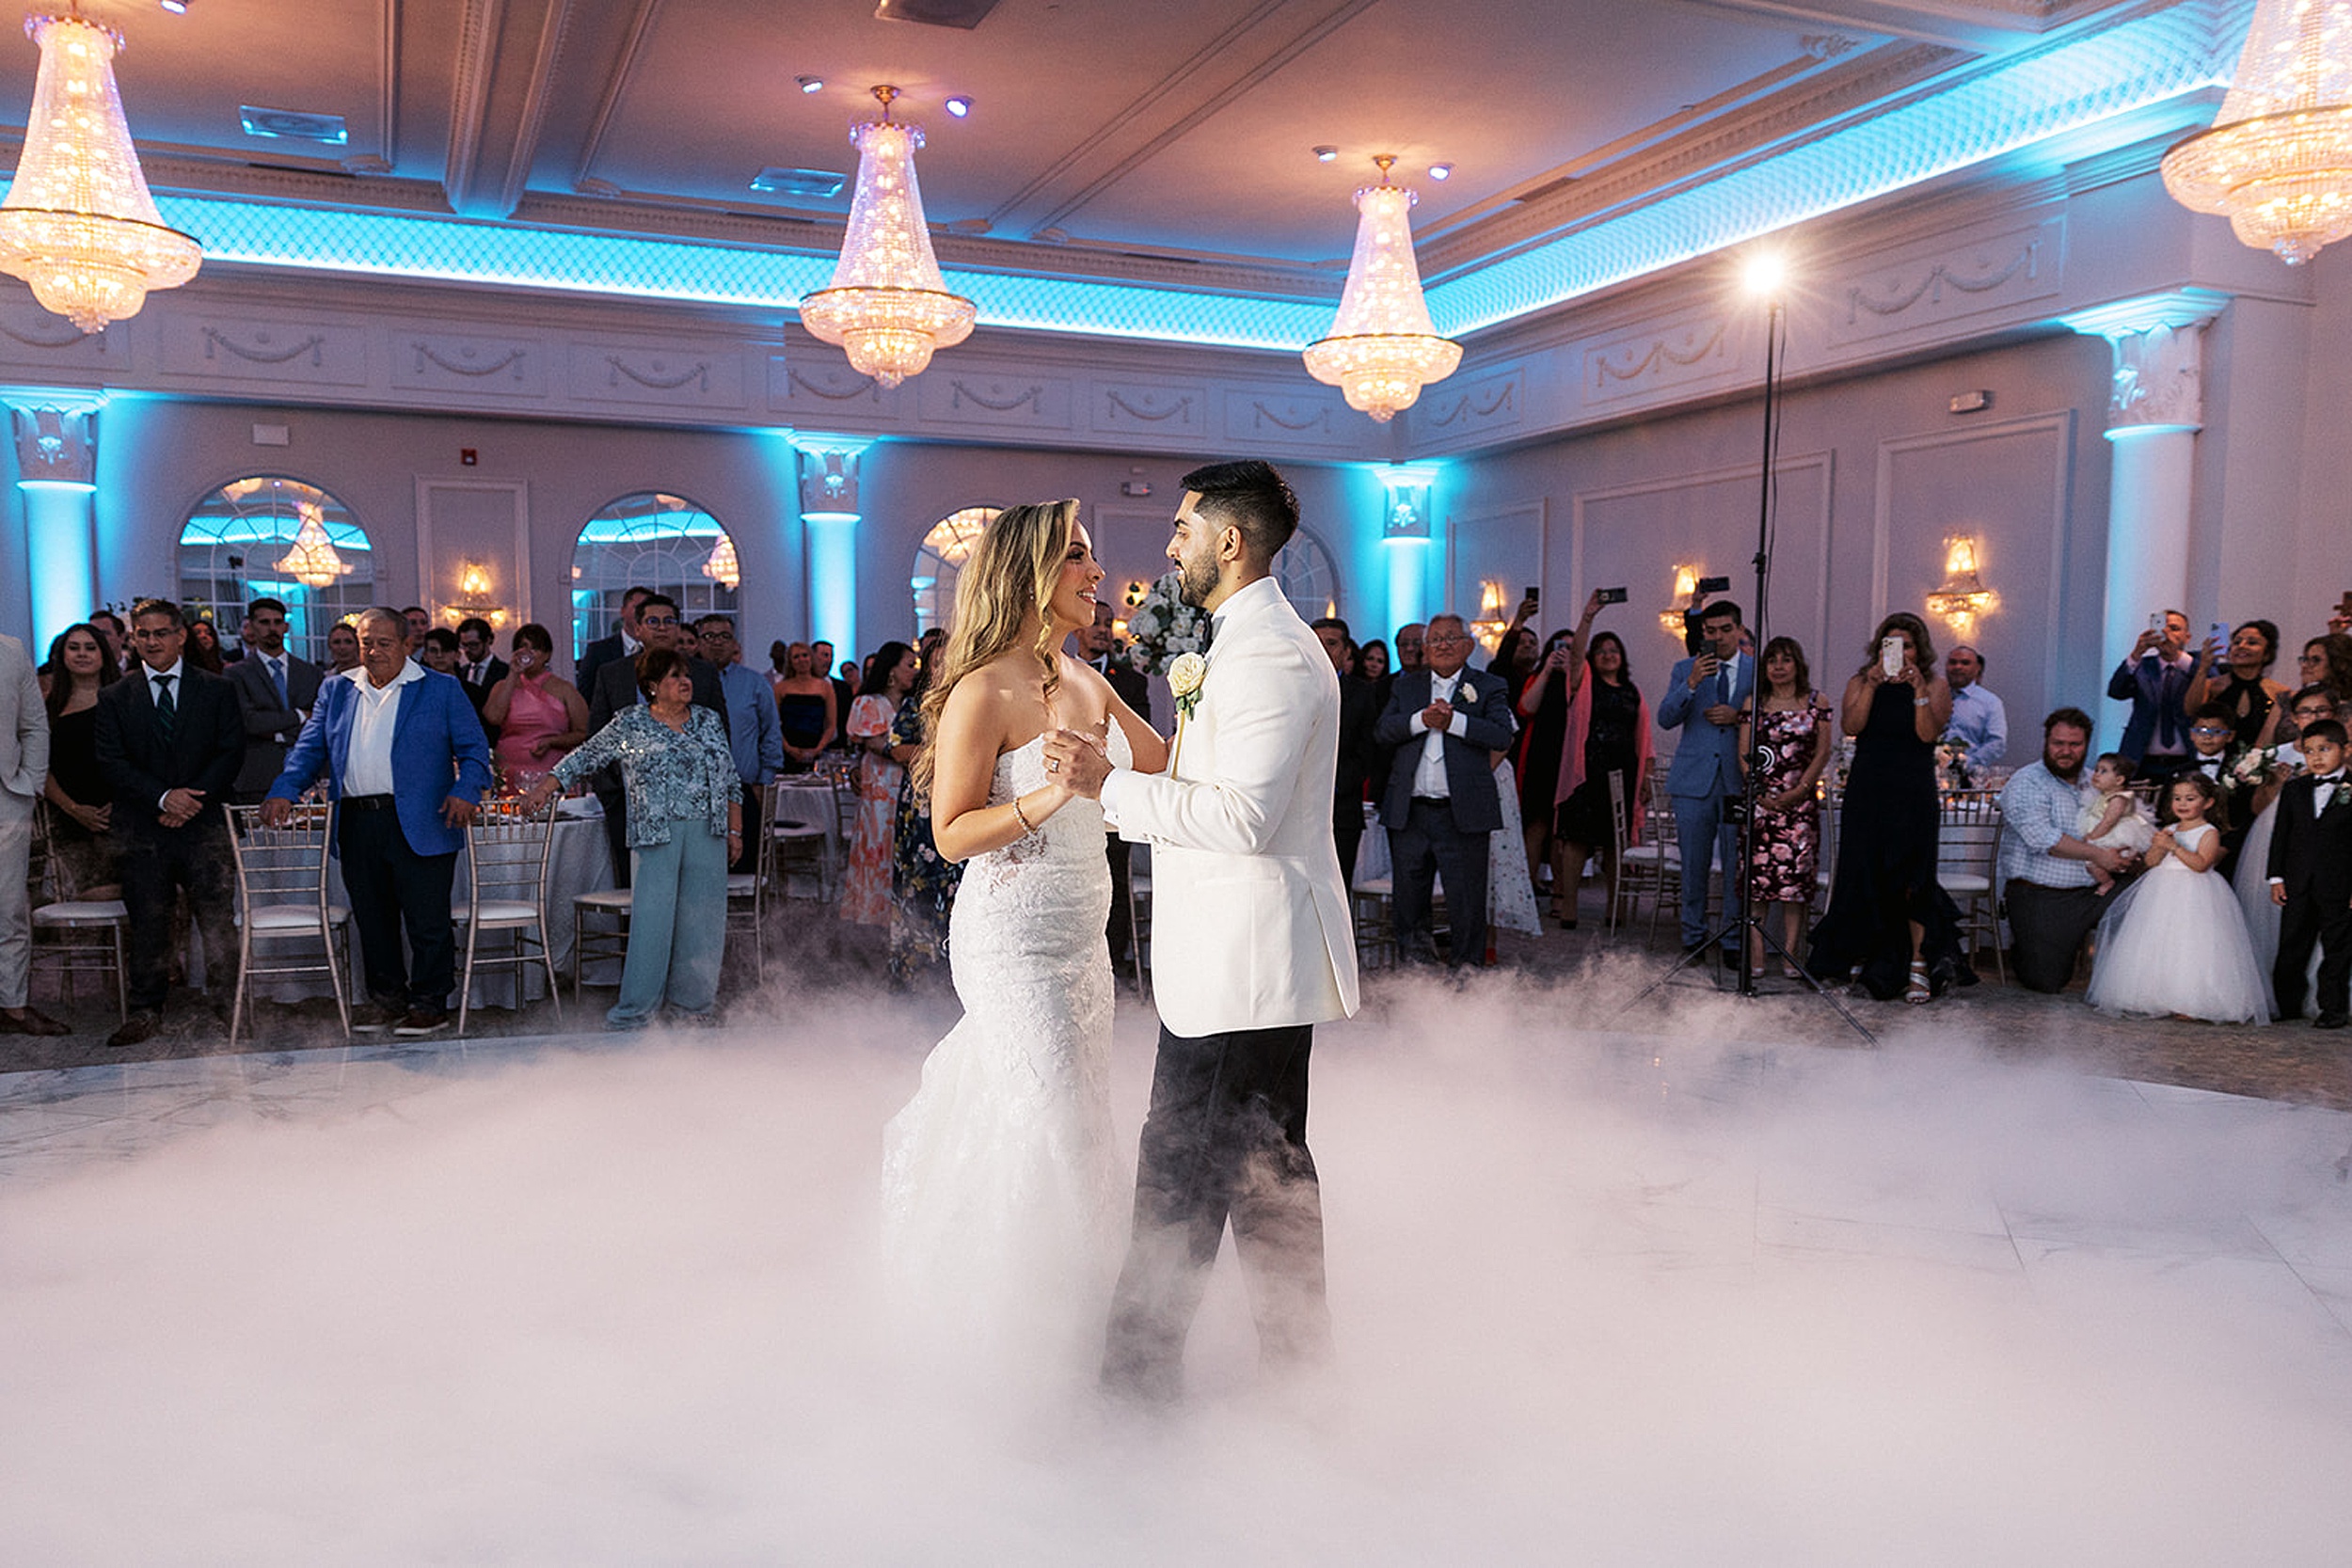 Newlyweds dance on a dance floor covered in ground fog and surrounded by crystal chandeliers at a valley regency wedding